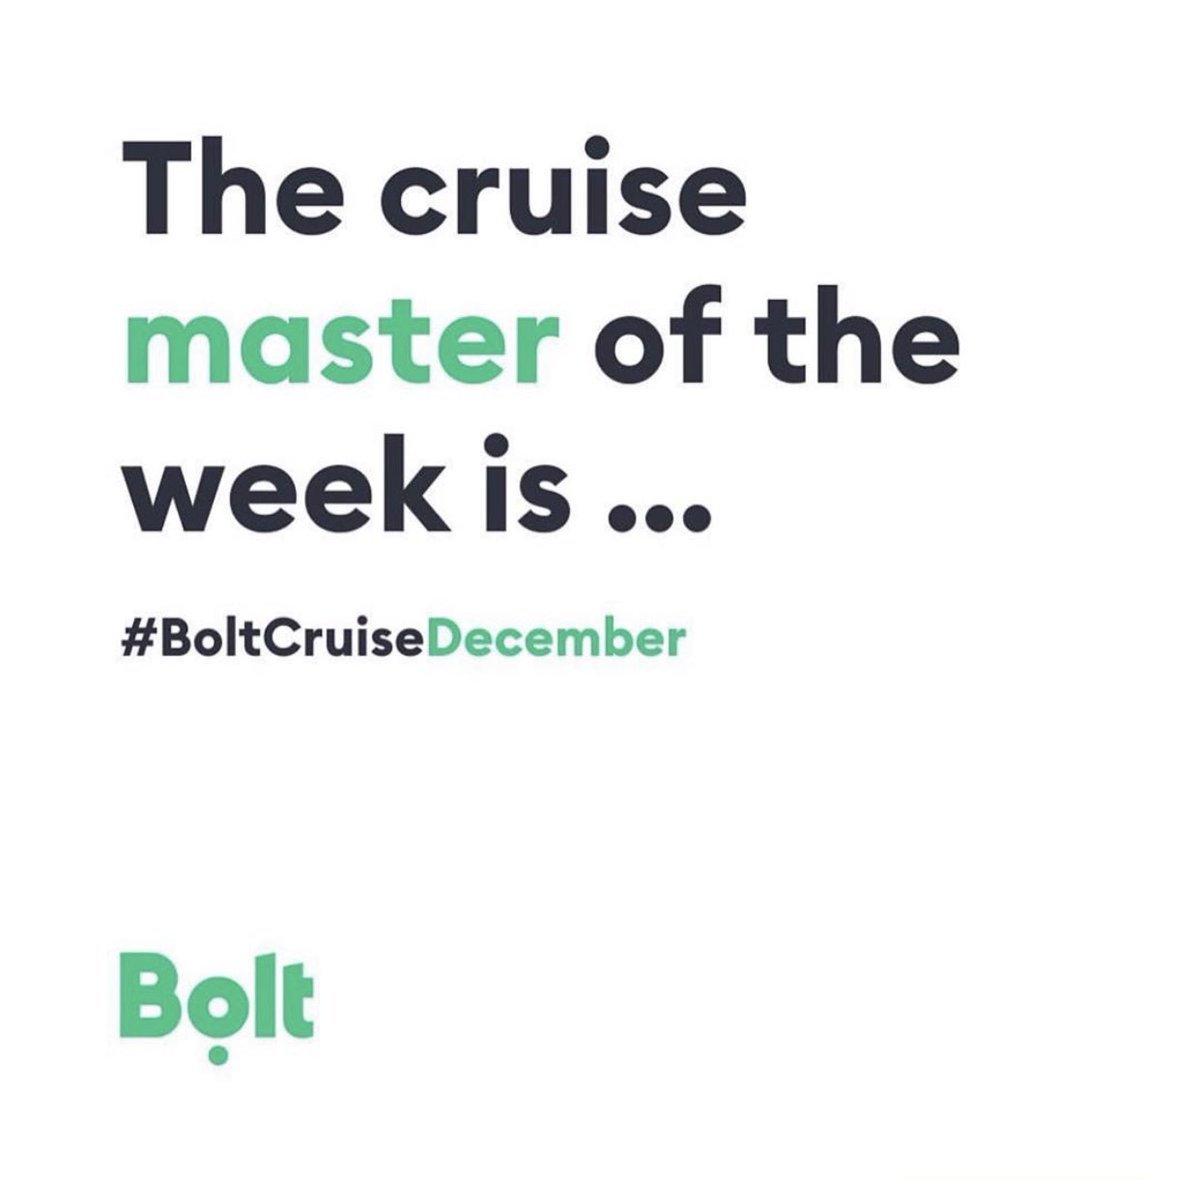 You can just be this week #BoltCruiseDecember Master...
Snap a picture of doing something you find fun
Post it on IG
Tag and follow Bolt
Use #BoltCruiseDecember